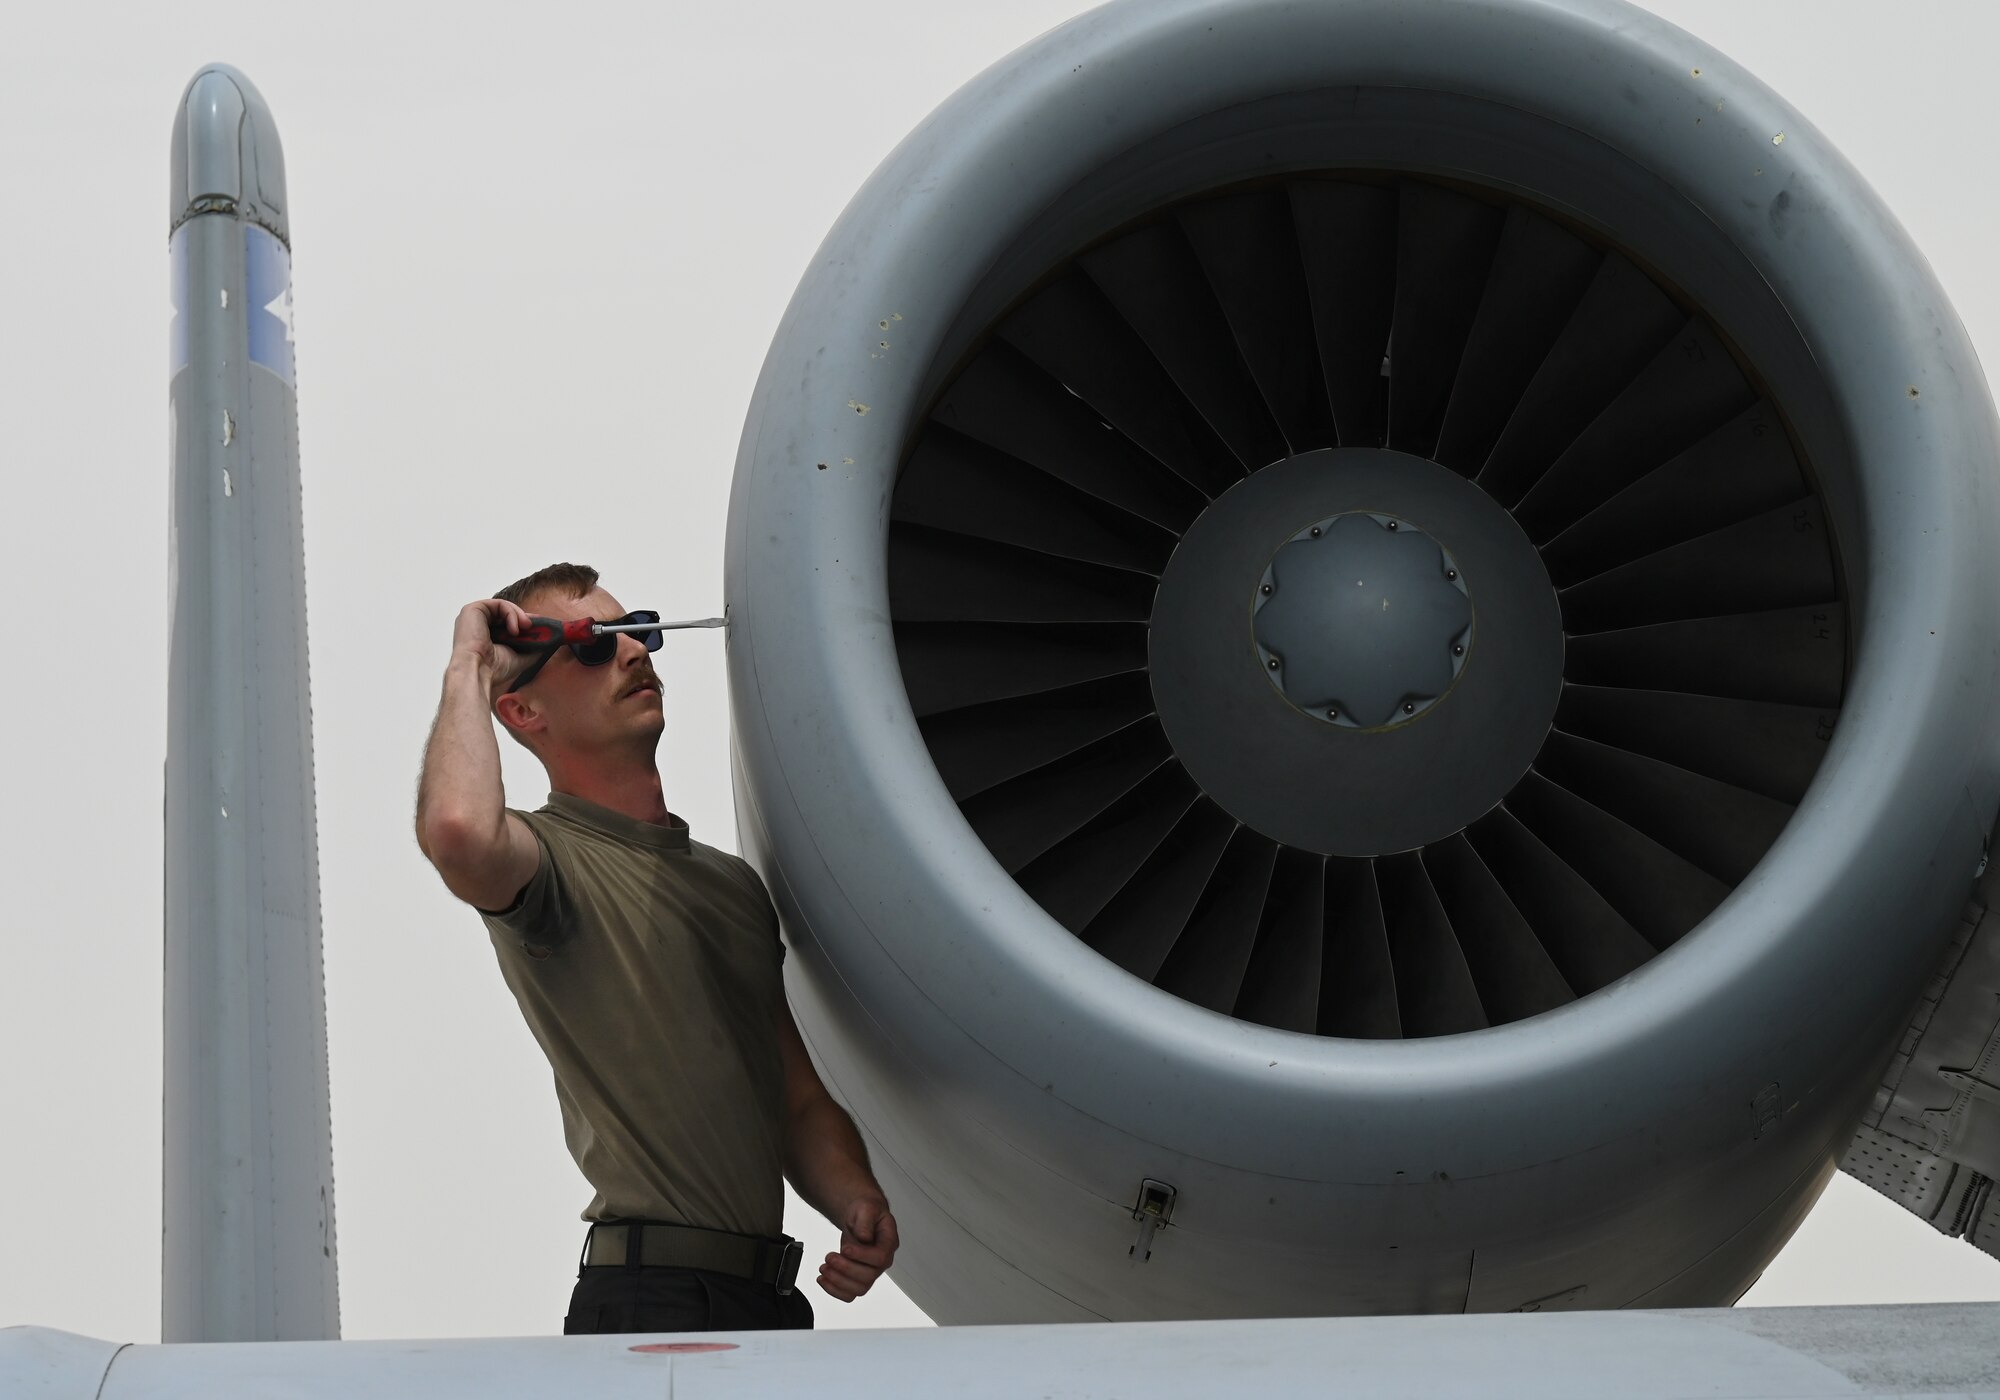 U.S. Air Force Staff Sgt. Kori Rennecker, 75th Expeditionary Fighter Generation Squadron aerospace propulsion craftsman, removes an engine panel on a U.S. Air Force A-10 Thunderbolt II at Al Dhafra Air Base, United Arab Emirates, April 18, 2022. The deployment of A-10s provides additional capability in tandem with other fighter aircraft throughout the region. (U.S. Air Force photo by Tech. Sgt. Alex Fox Echols III)